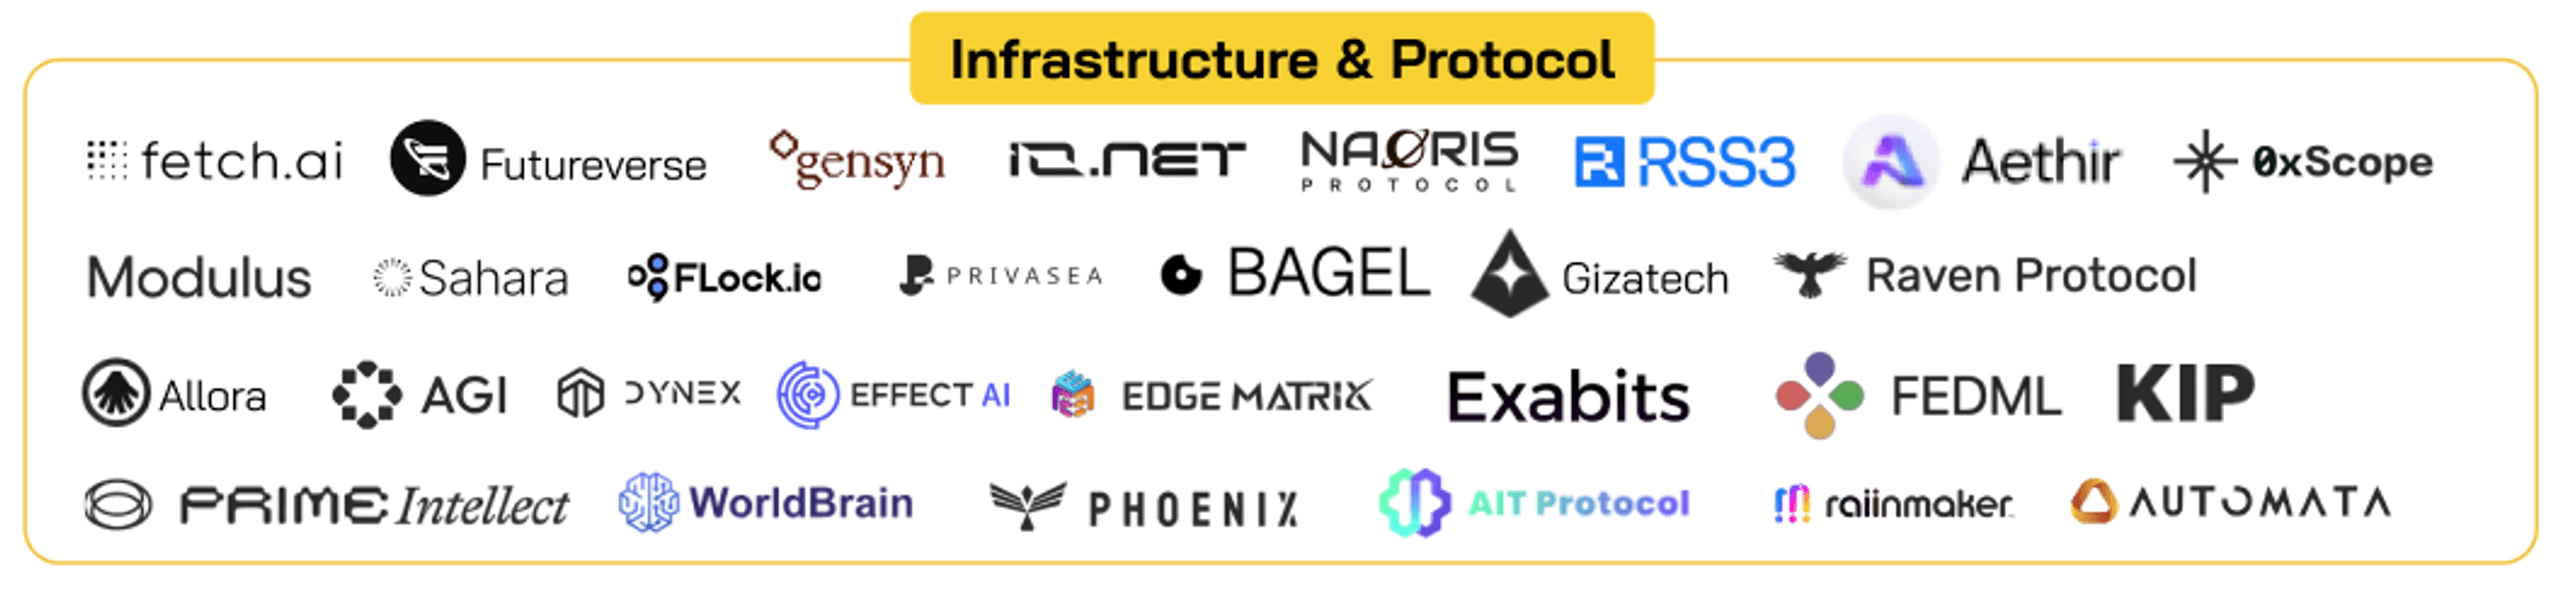 infrastructure và protocol trong ai